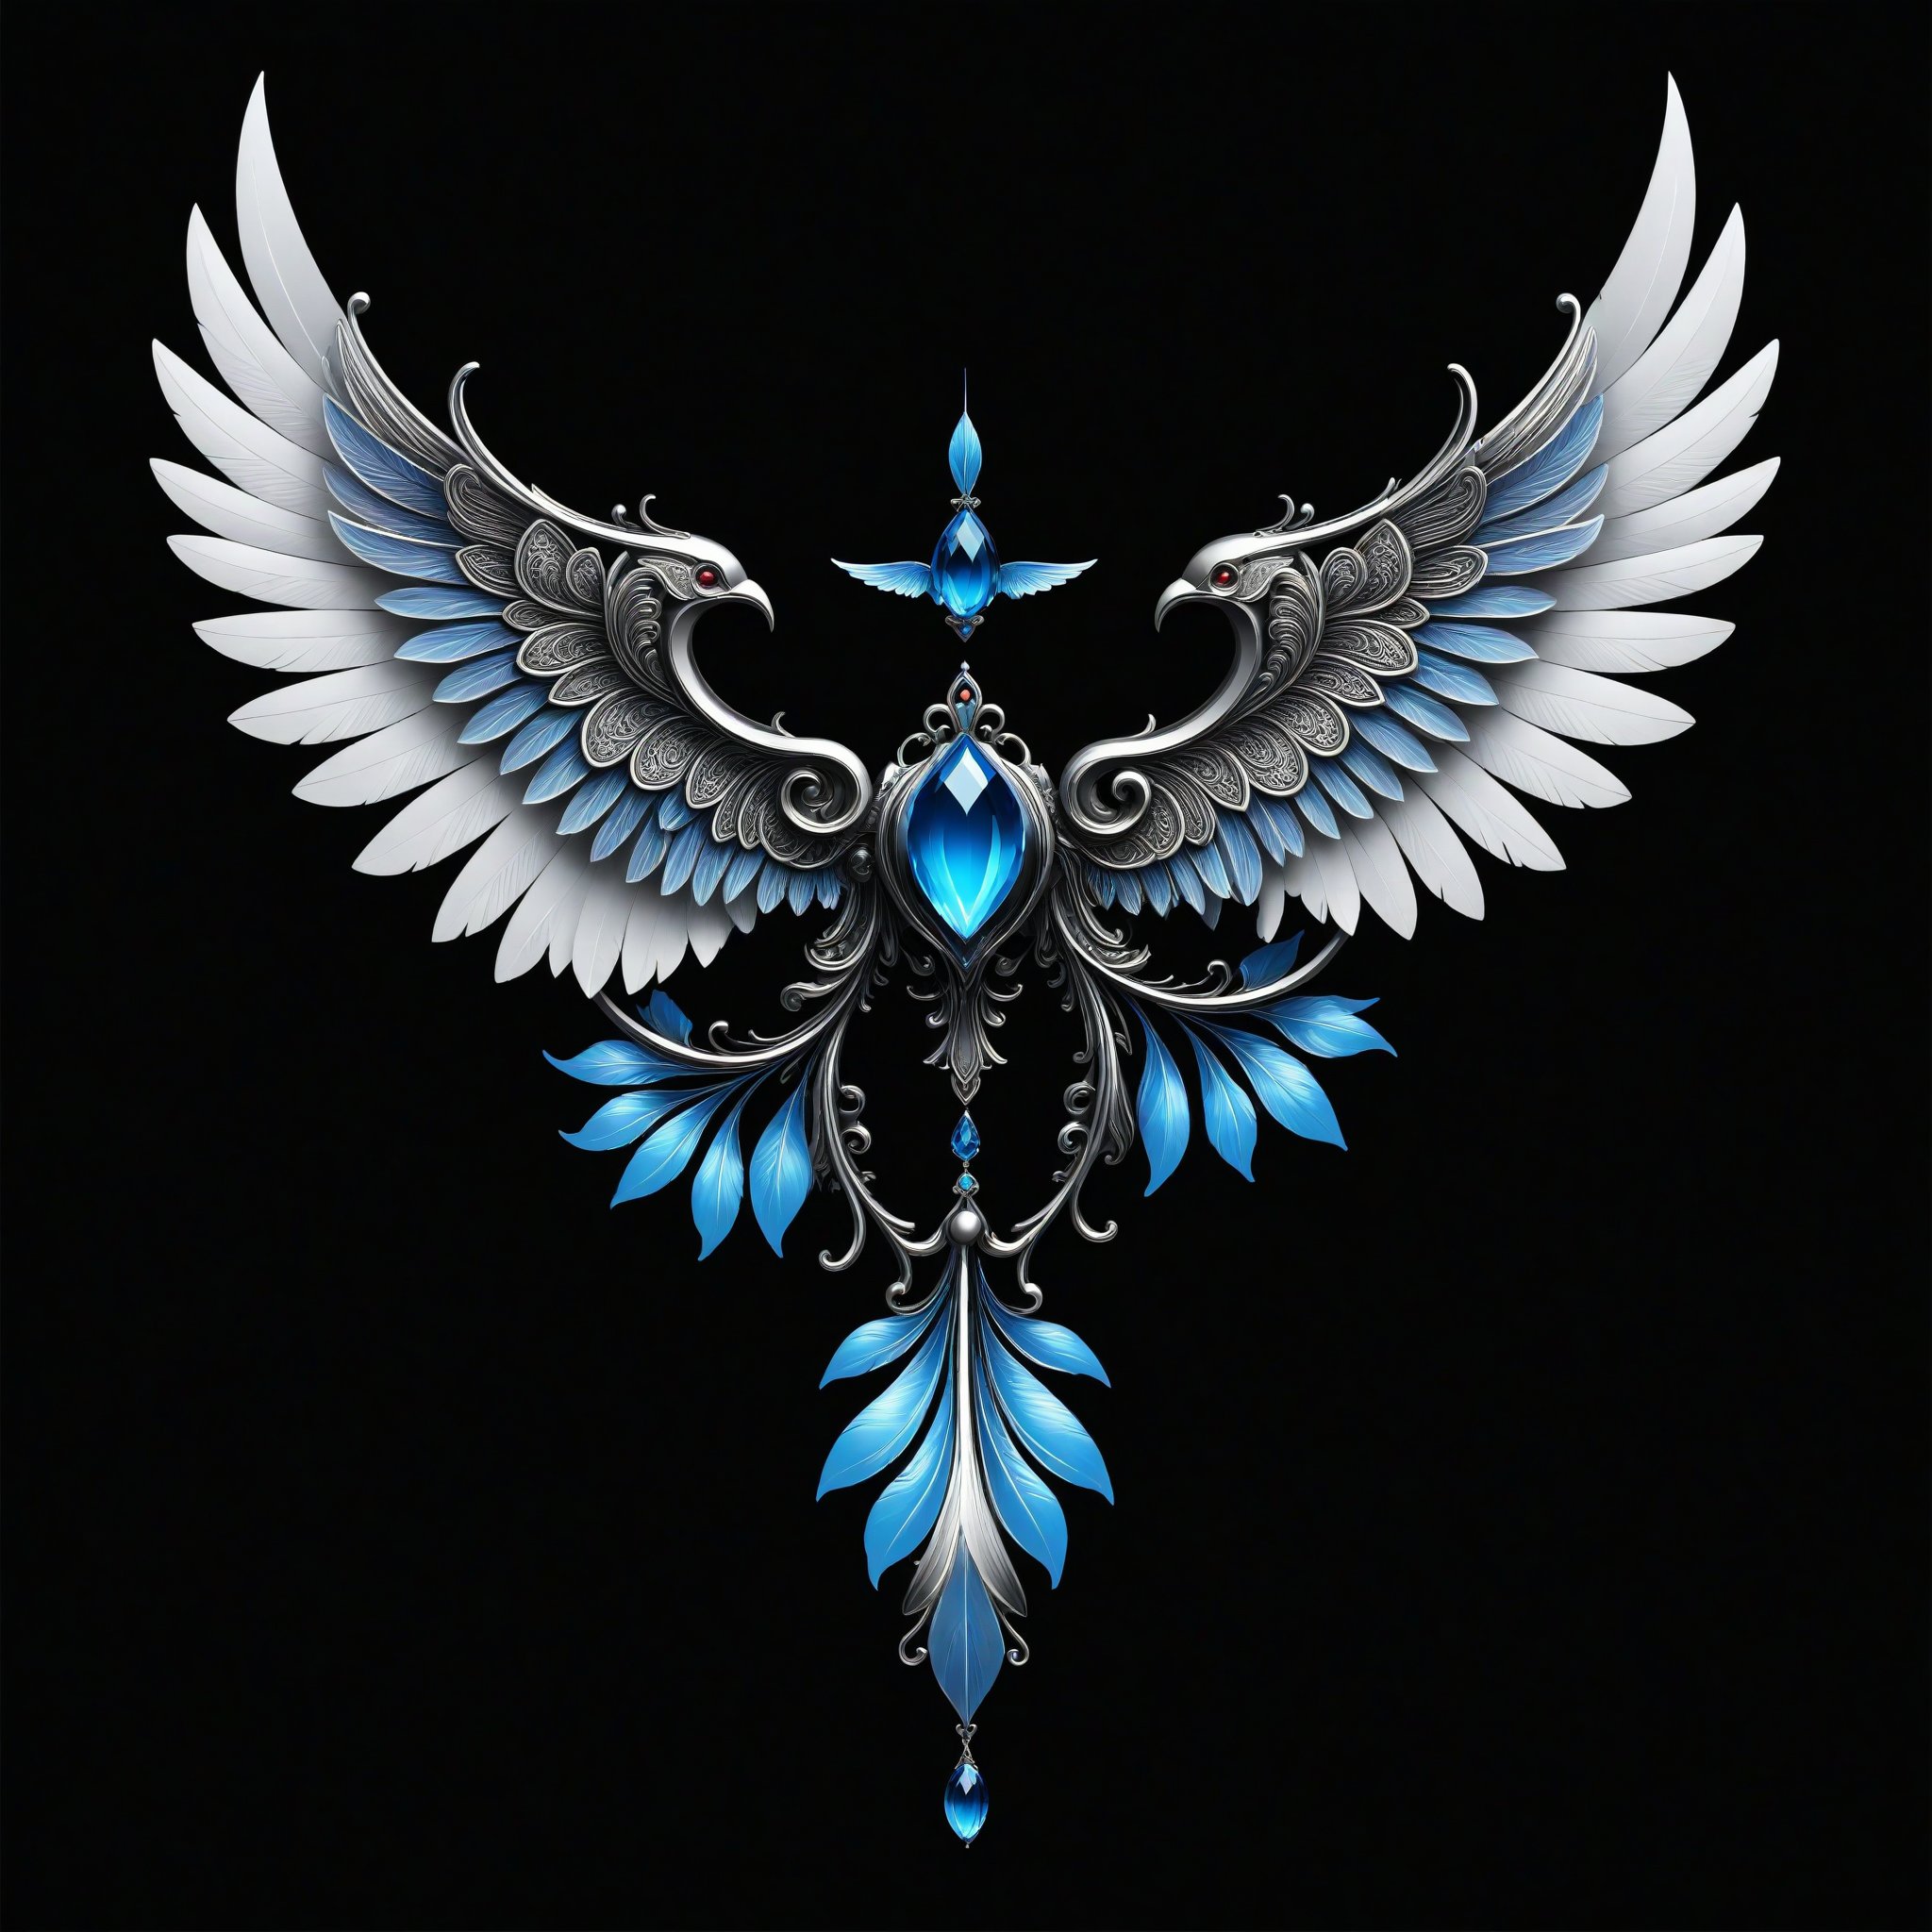 a hydragea whit wing majestic with clasic ornament Mechanical lines Elegance T-shirt design, BLACK BACKGROUND